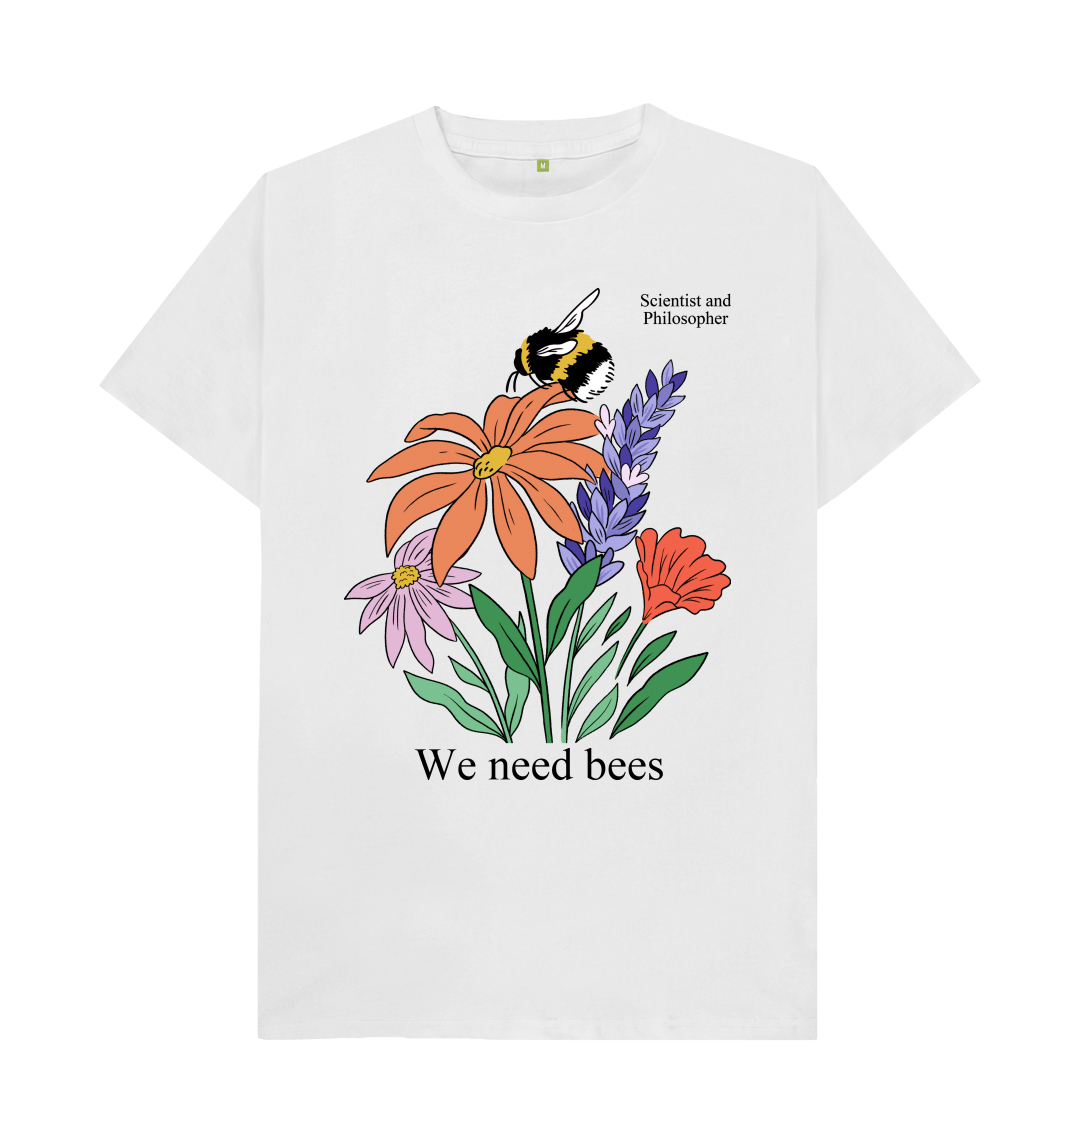 We need bees – Organic cotton T-shirt for adults